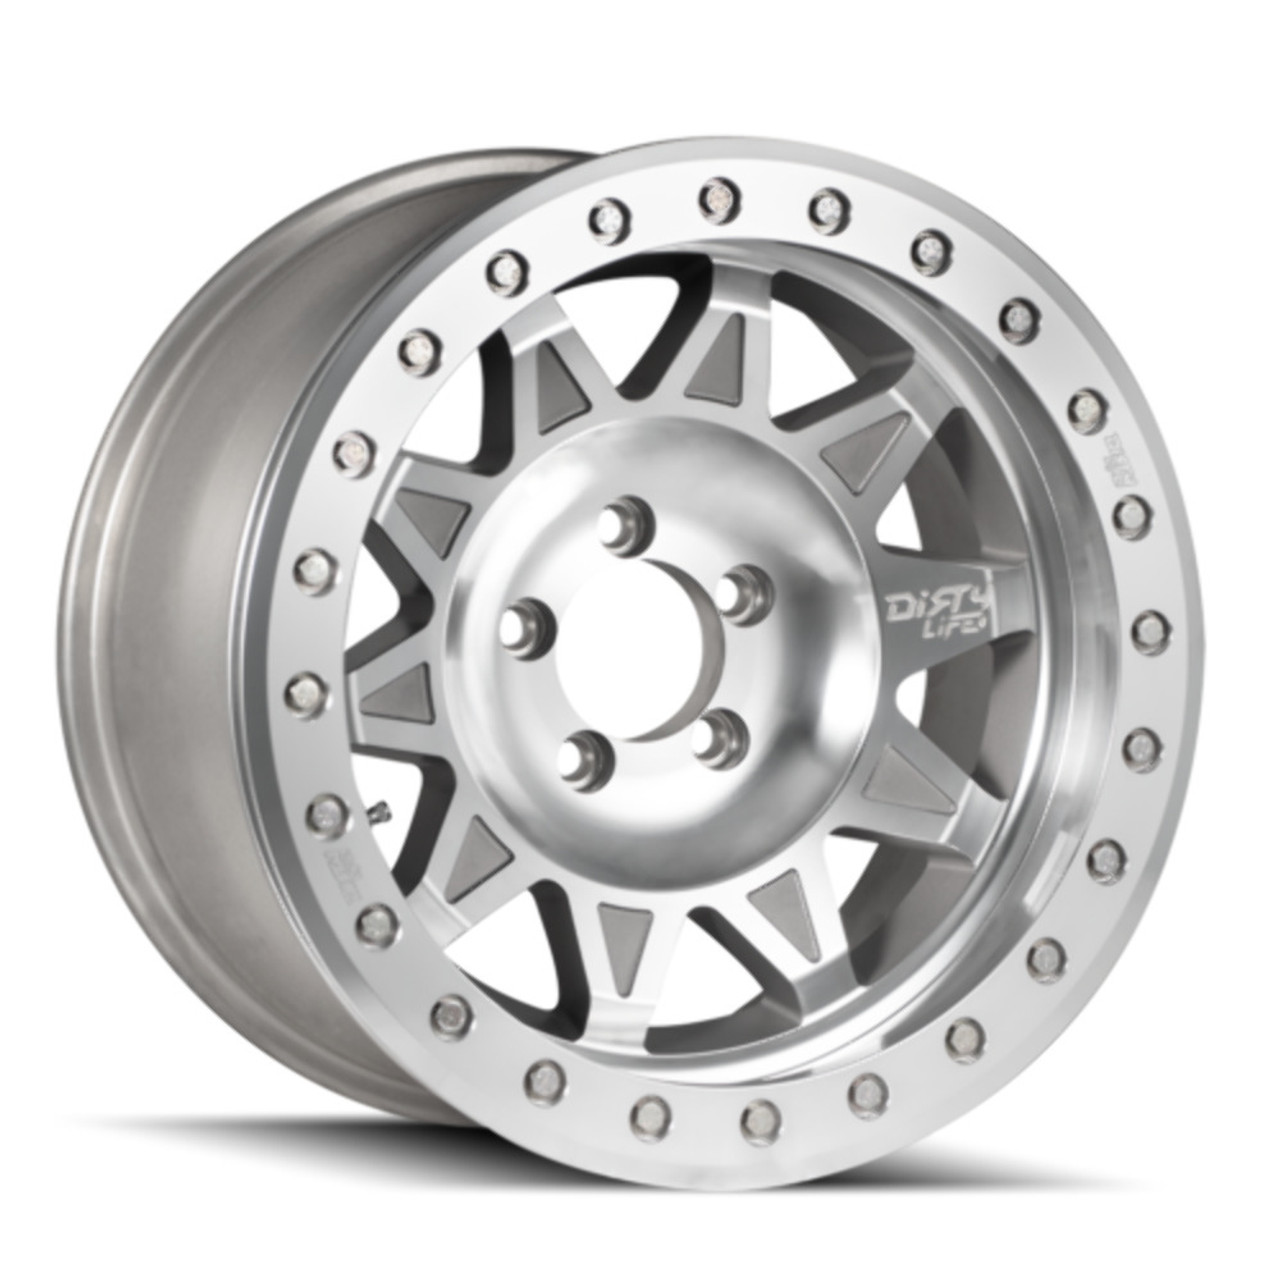 17" Dirty Life Roadkill 17x9 Machined Beadlock 5x4.5 Wheel -14mm For Ford Jeep